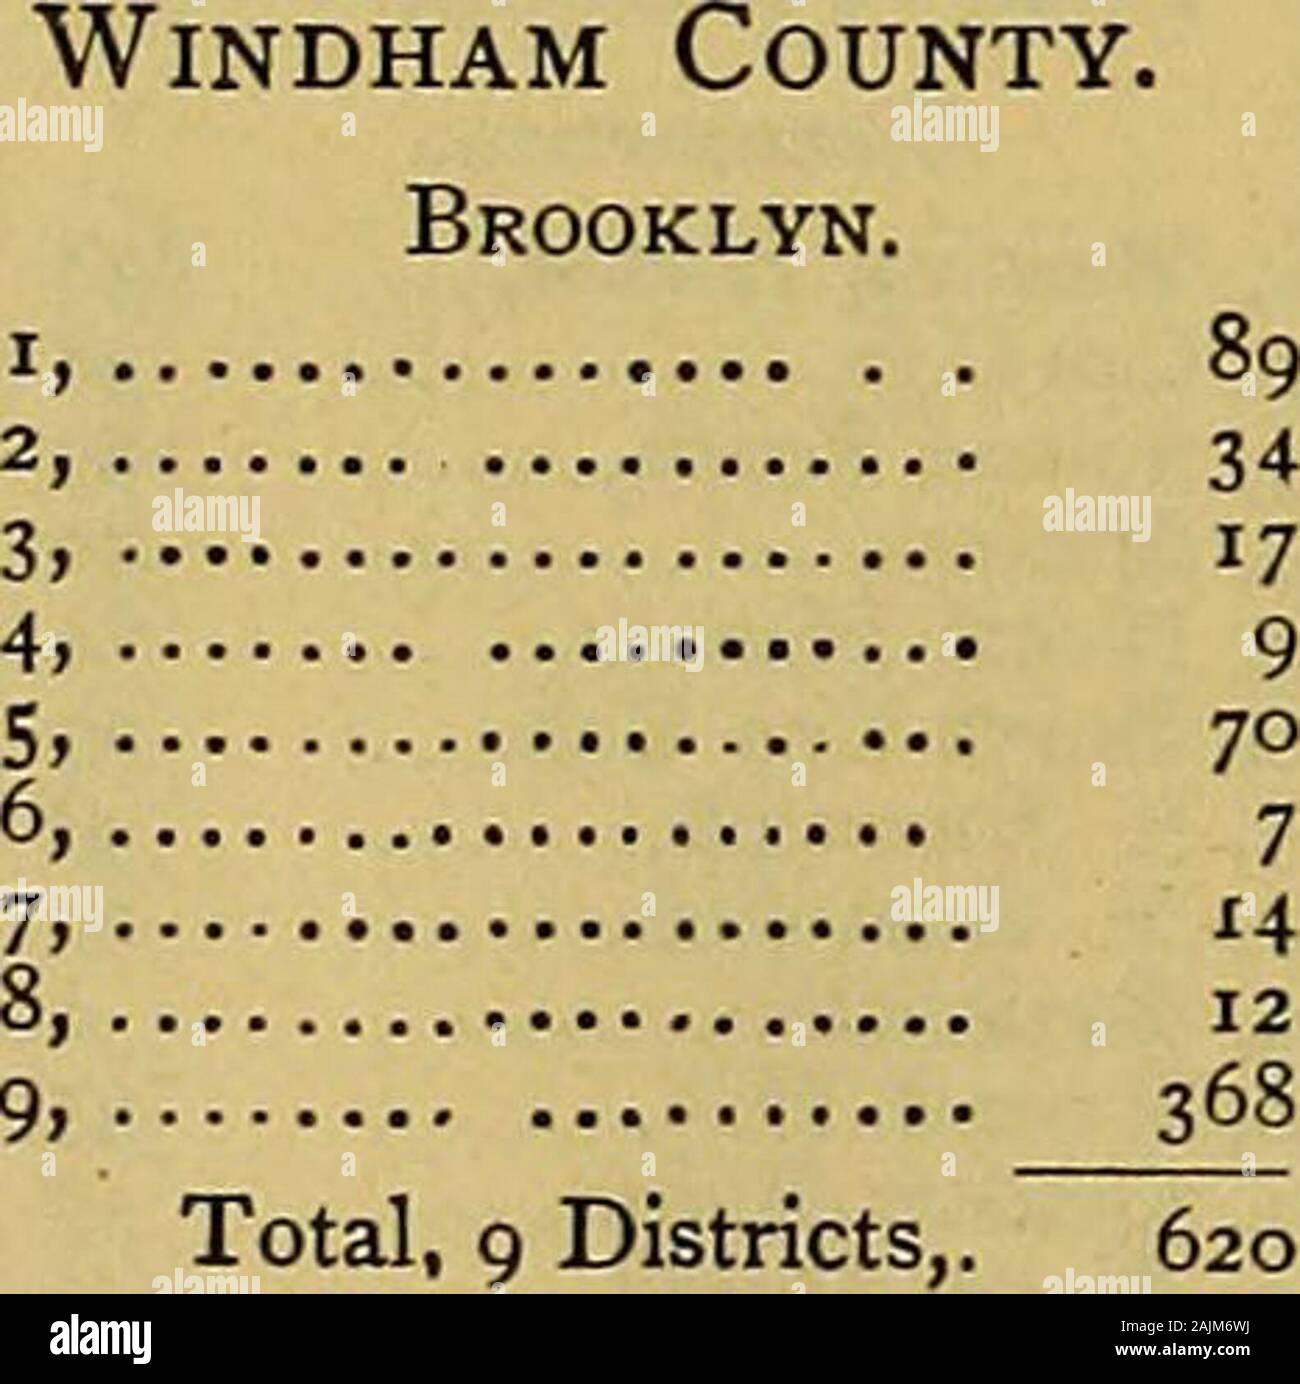 Public documents of the State of Connecticut . Canterbury. Packerville, Baldwin, Willoughby, Green, Hyde...... North Society,.... Frost, Peck, Smith, Westminster, Raymond, Total, n Districts,. ENUMERATION BY DISTRICTS. 63 Windham County — continued. Chaplin. Districts, Enum. i8q2. Consolidated, 105 Total, 1 District,.. 105 Eastford. 1, Eastford, 2, East Hill, 3, Phcenixville, 4, South, 5, Sibley, 6, North Ashford,.... 7, Shippee, , 8, Axe Factory, Total, 8 Districts,. Hampton. Center, Union, Goshen, No. Bigelow, So. Bigelow, Howard Valley, Appequog, Raymond, ... Total, 8 Districts,. KlLLINGLY. Stock Photo